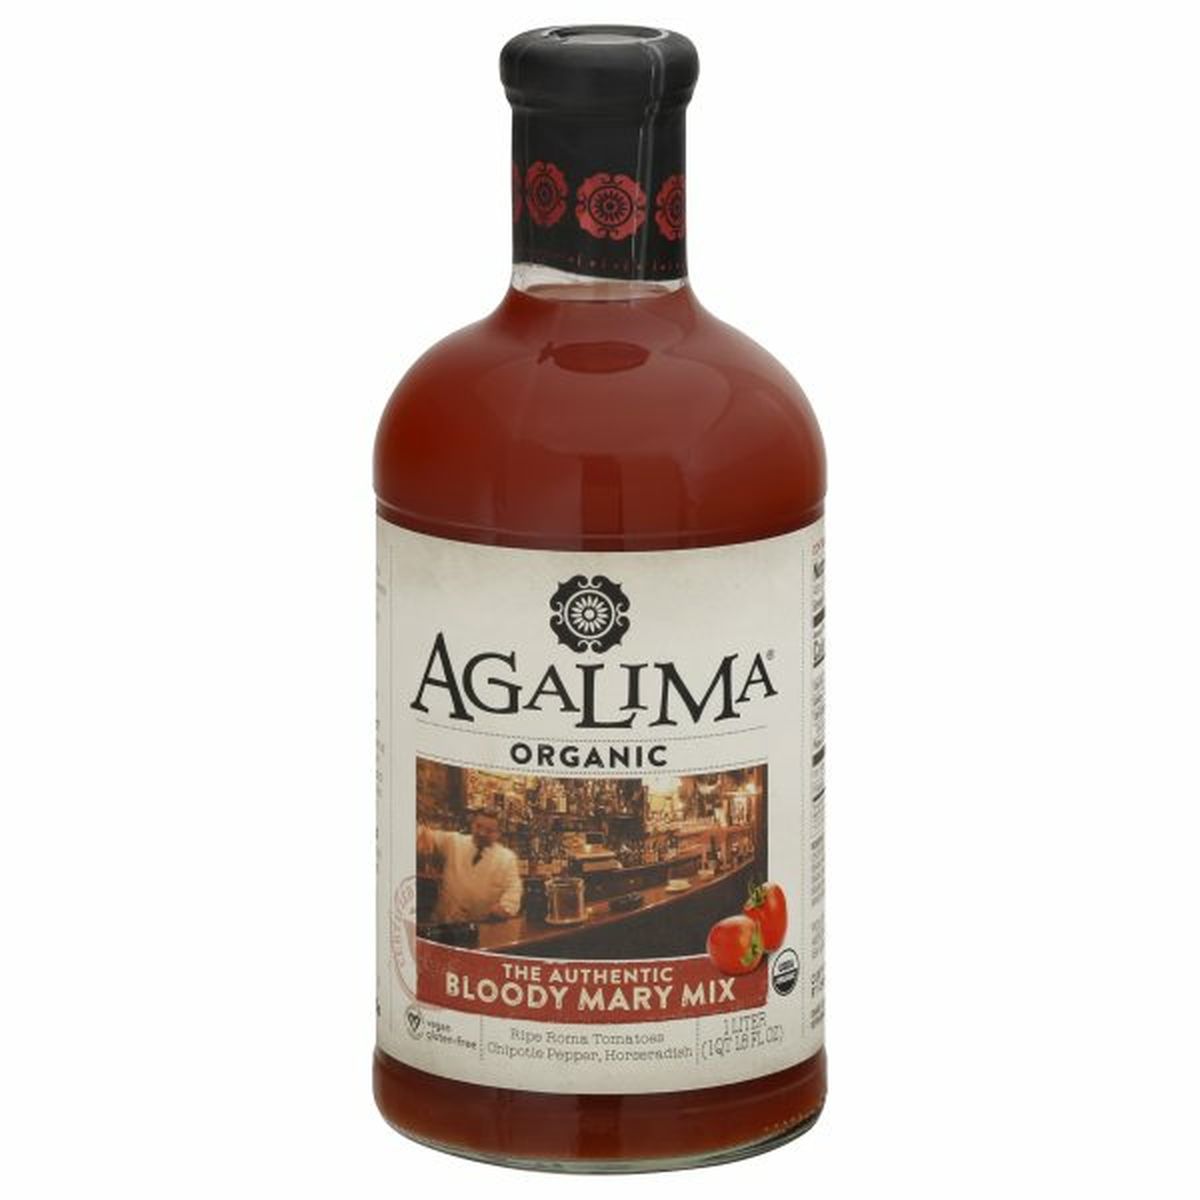 Calories in Agalima Bloody Mary Mix, Organic, The Authentic